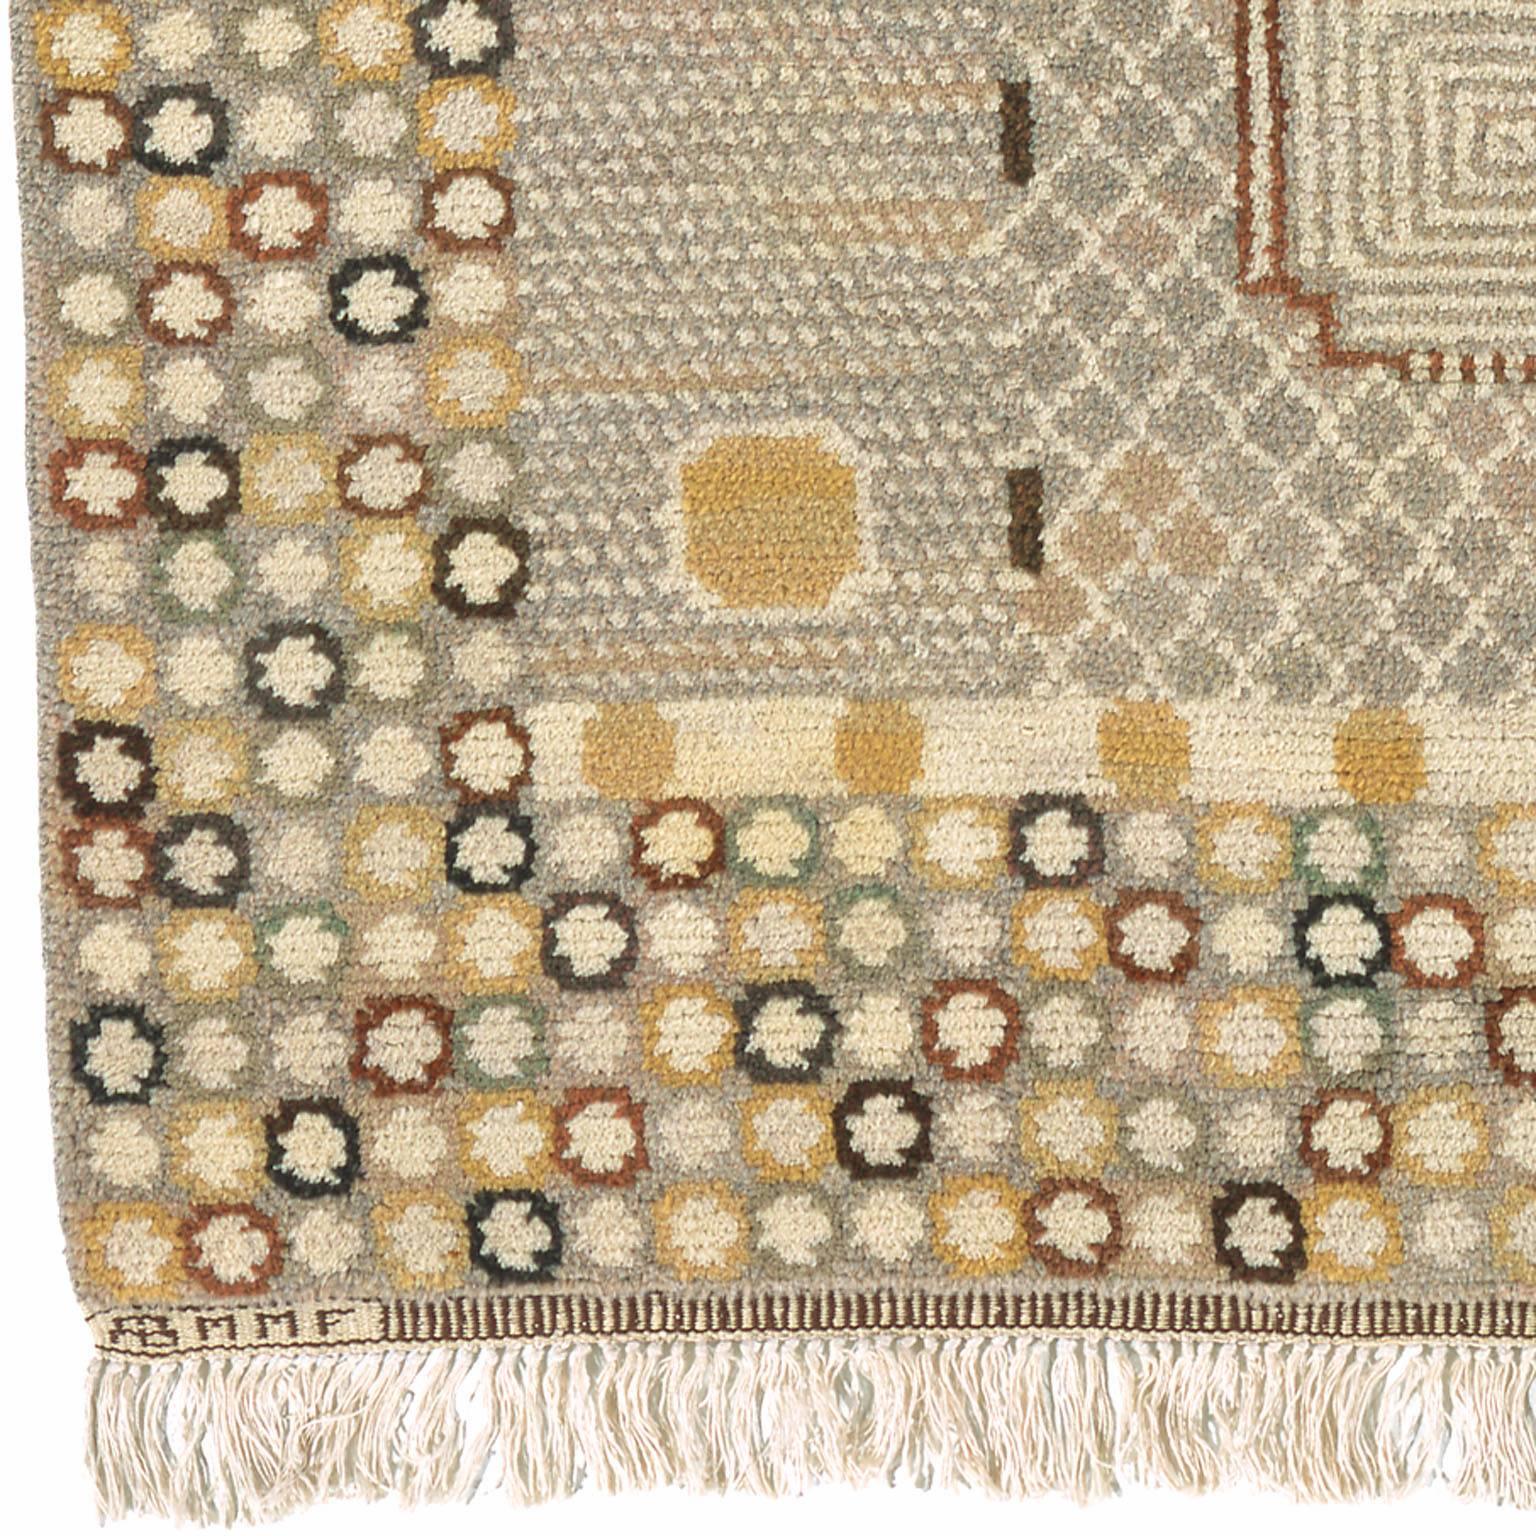 Mid-20th century Swedish pile carpet
Sweden ca. 1947
handwoven
Initialed: AB MMF BN (Barbro Nilsson for AB Märta Måås-Fjetterström ).